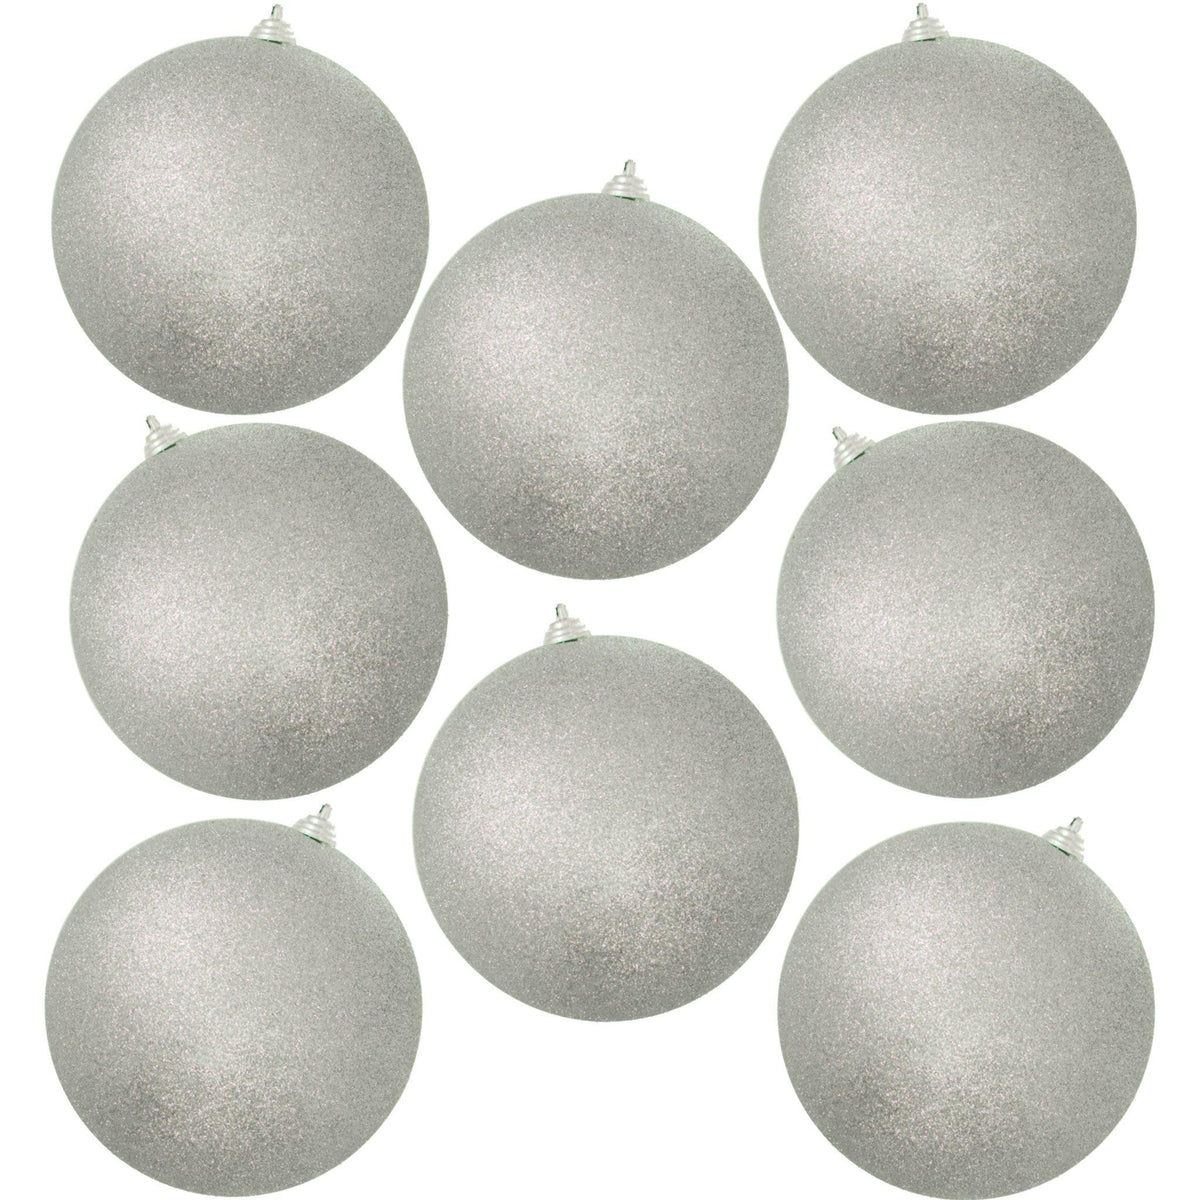 Buy Matte Silver Ball Ornaments Shatterproof Plastic from Lee Display 50mm